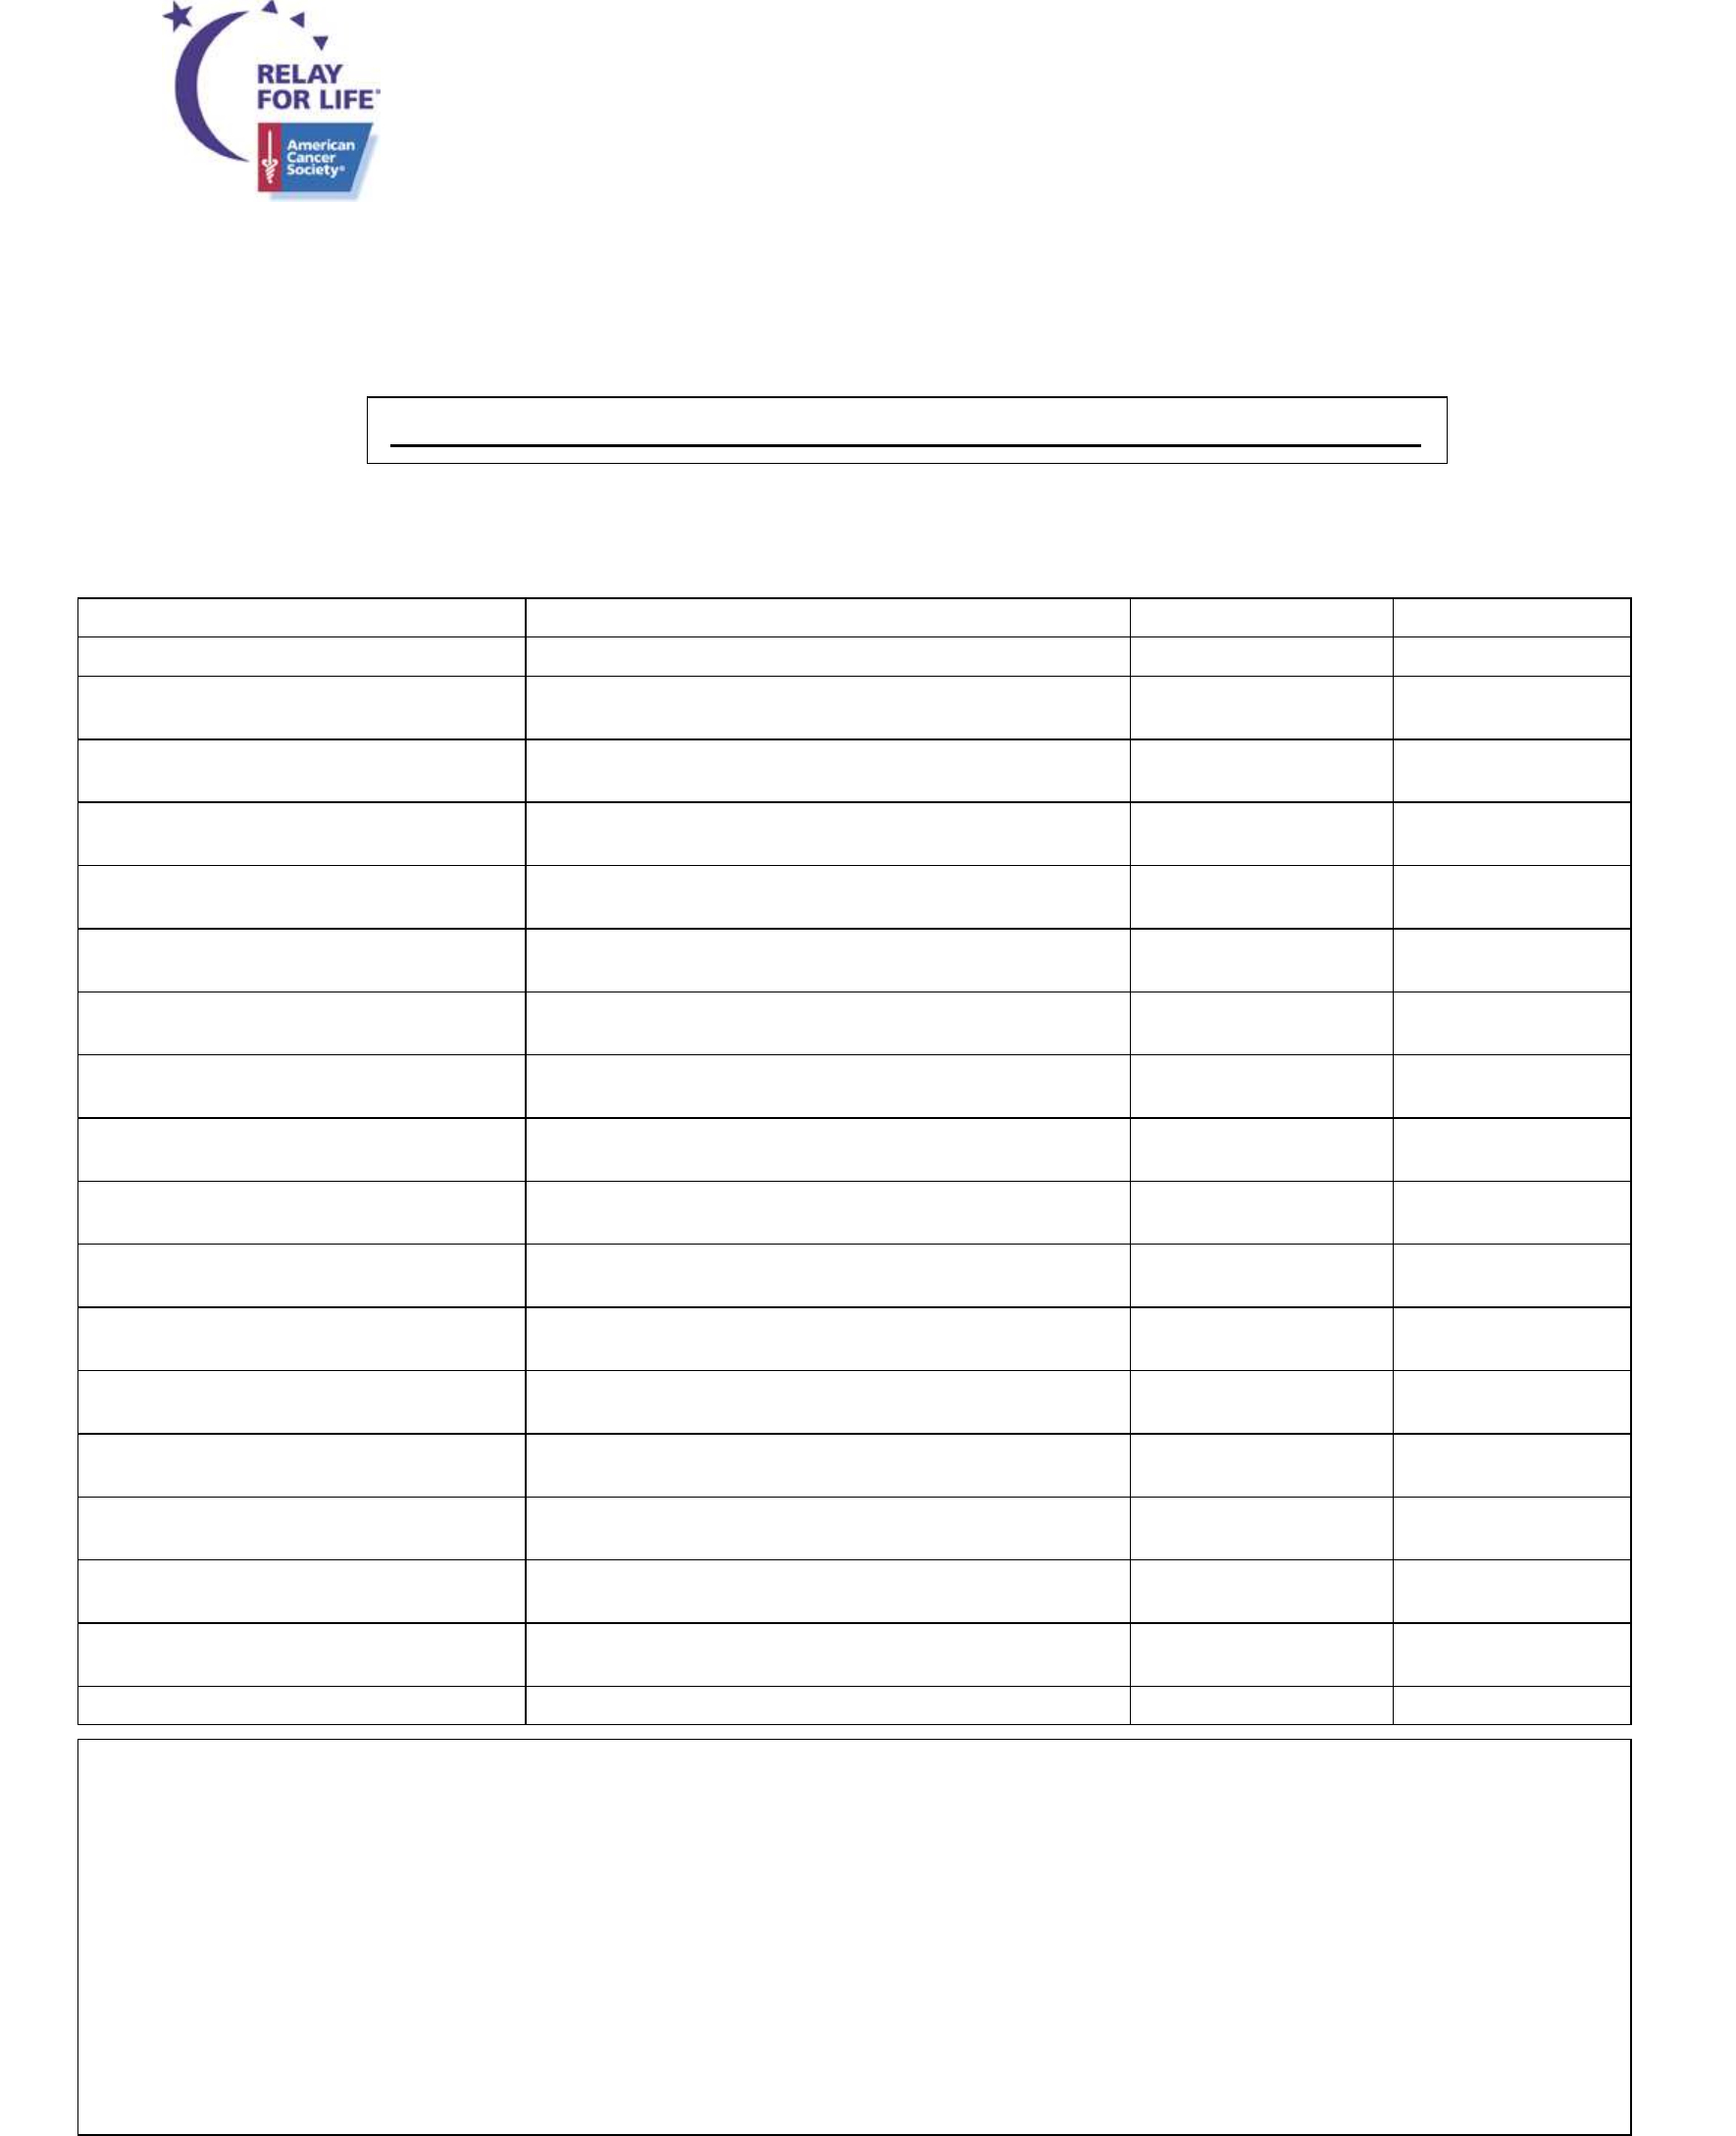 Relay For Life Donation Form – America Free Download Pertaining To Blank Sponsorship Form Template